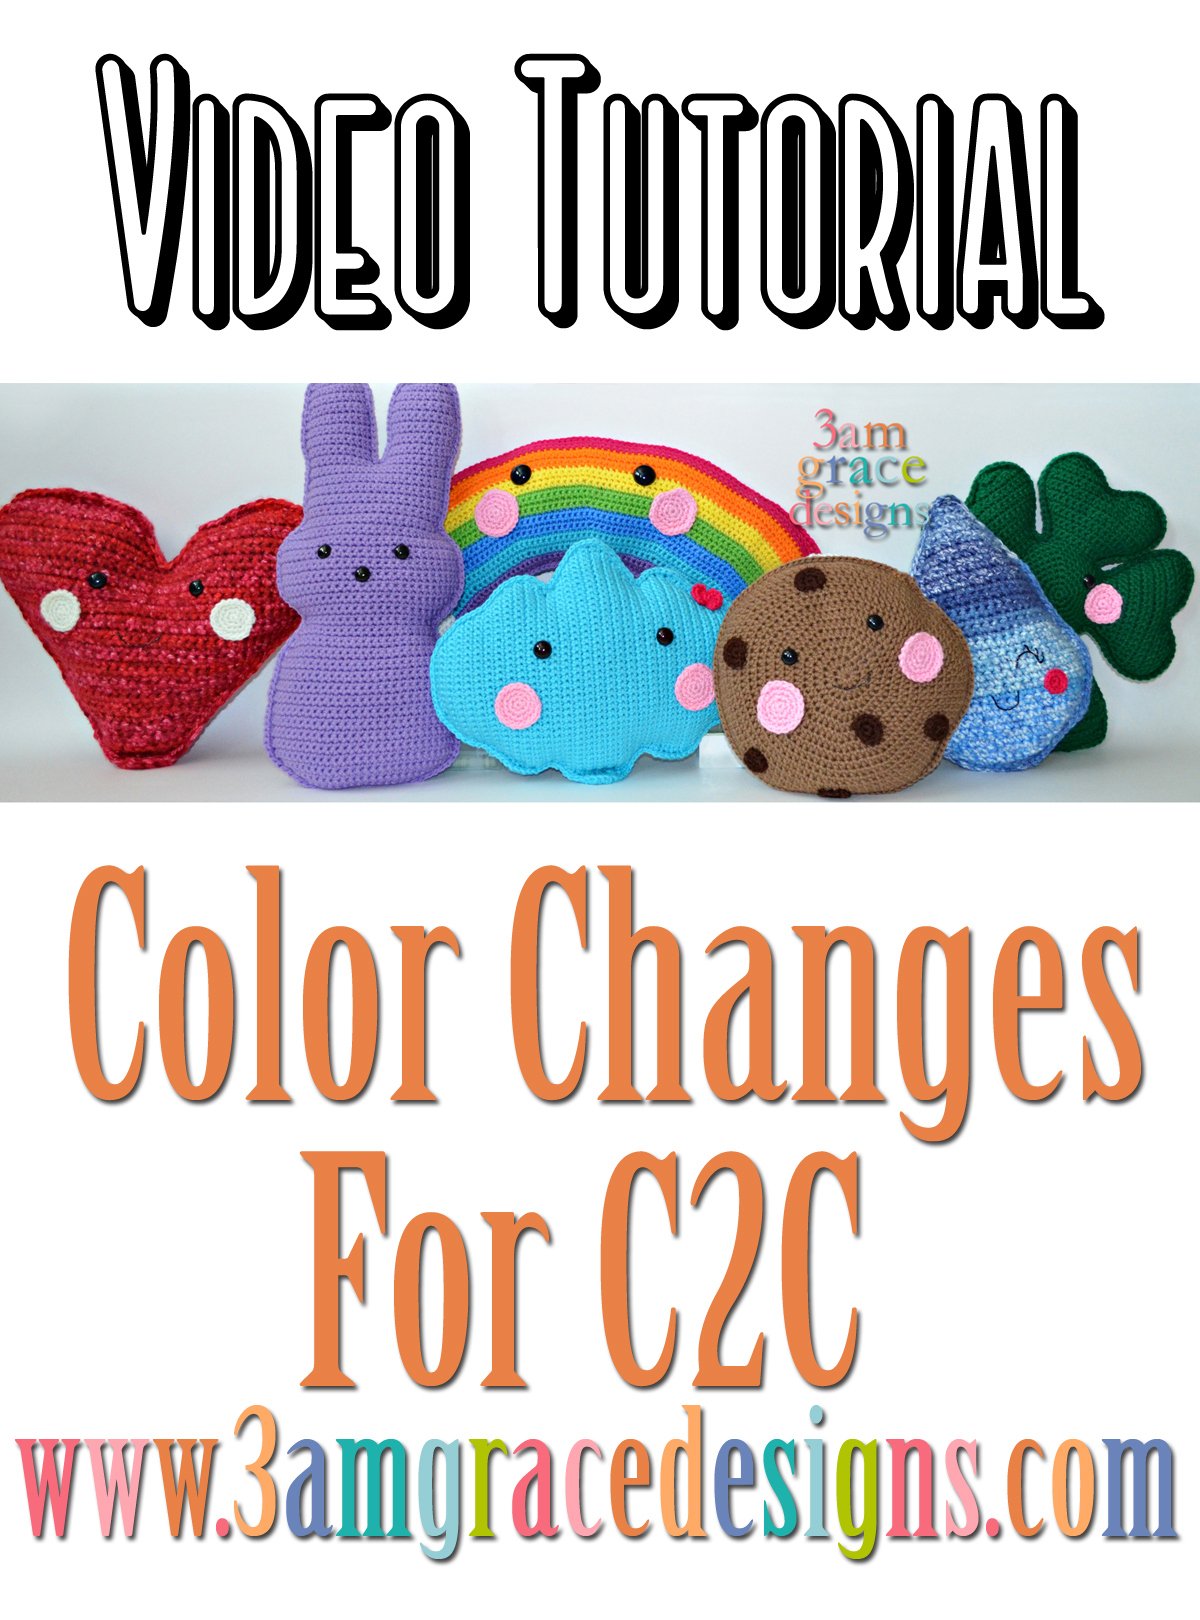 How To: Color Changes for C2C